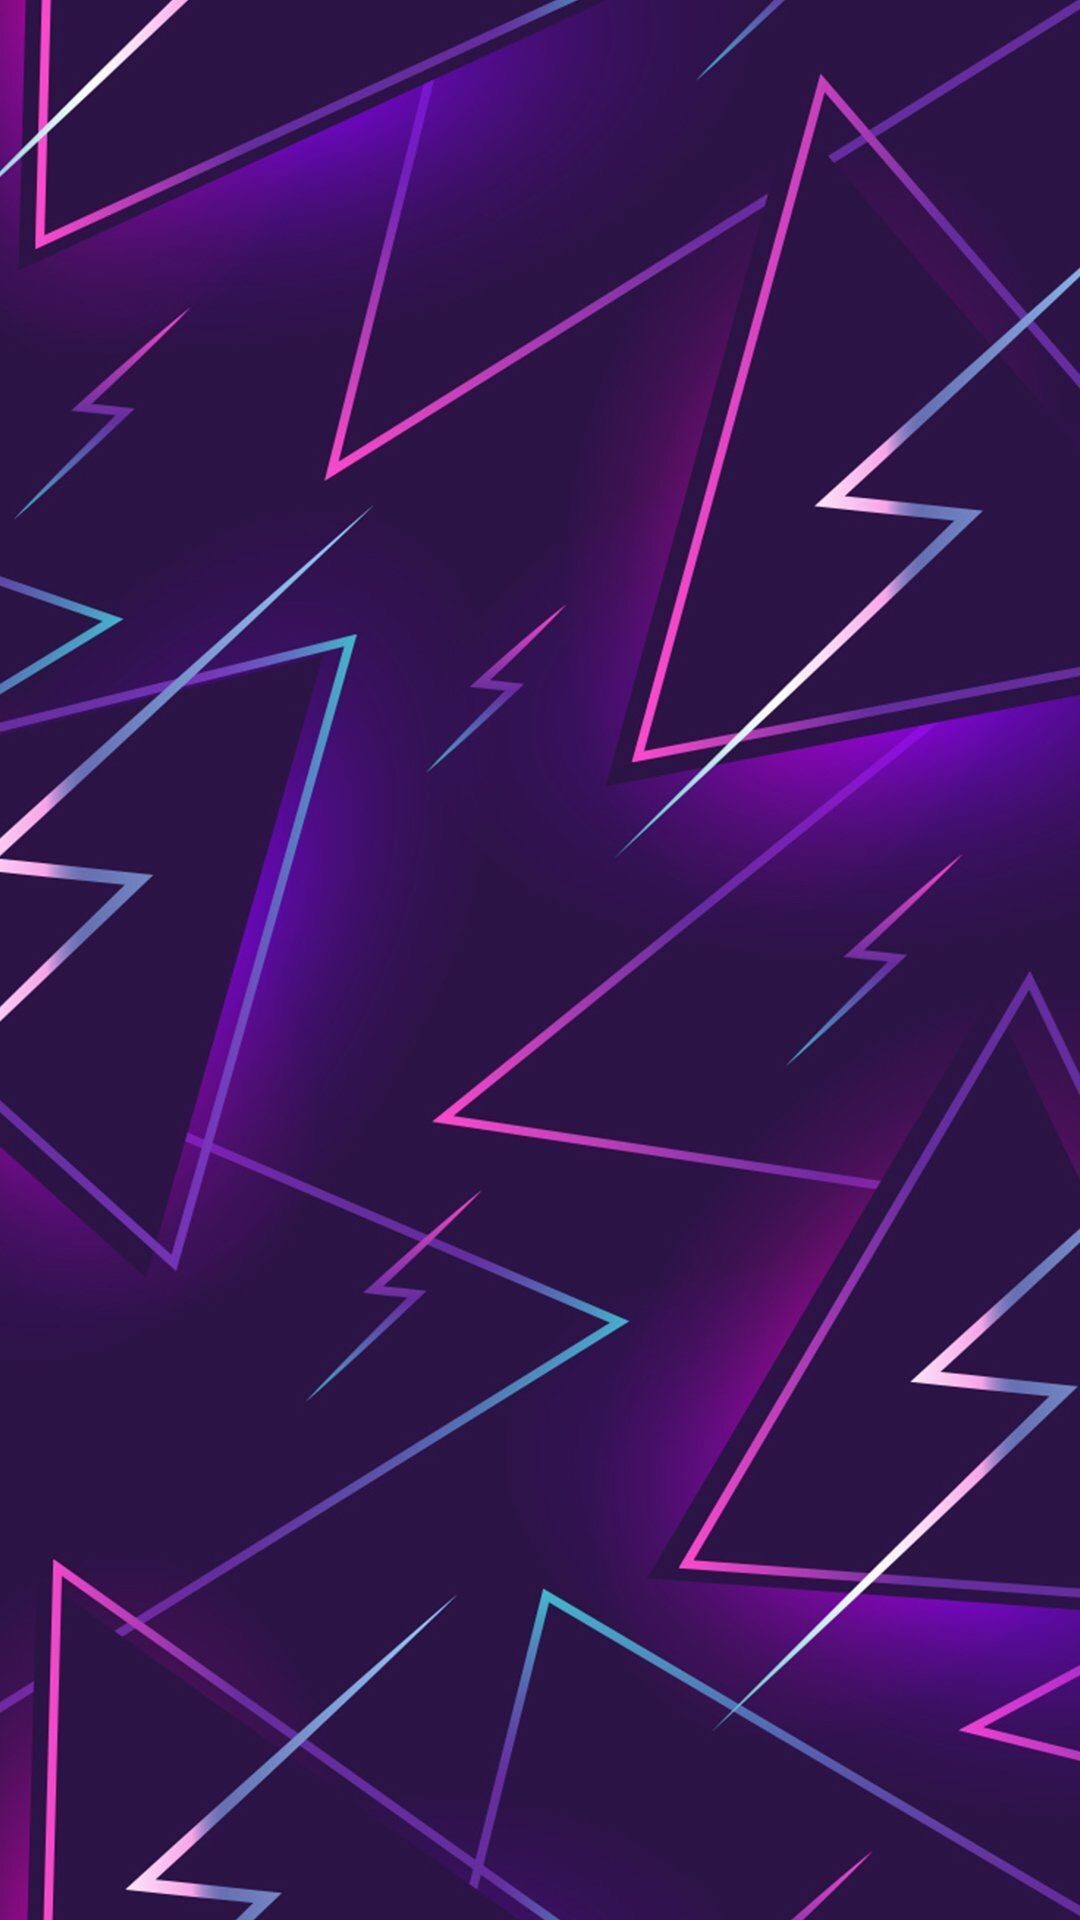 1080x1920 #Colorful #Dark iPhone wallpaper Doodle Wall, Purple Wallpaper, Geometric  Wallpaper, Cellphone